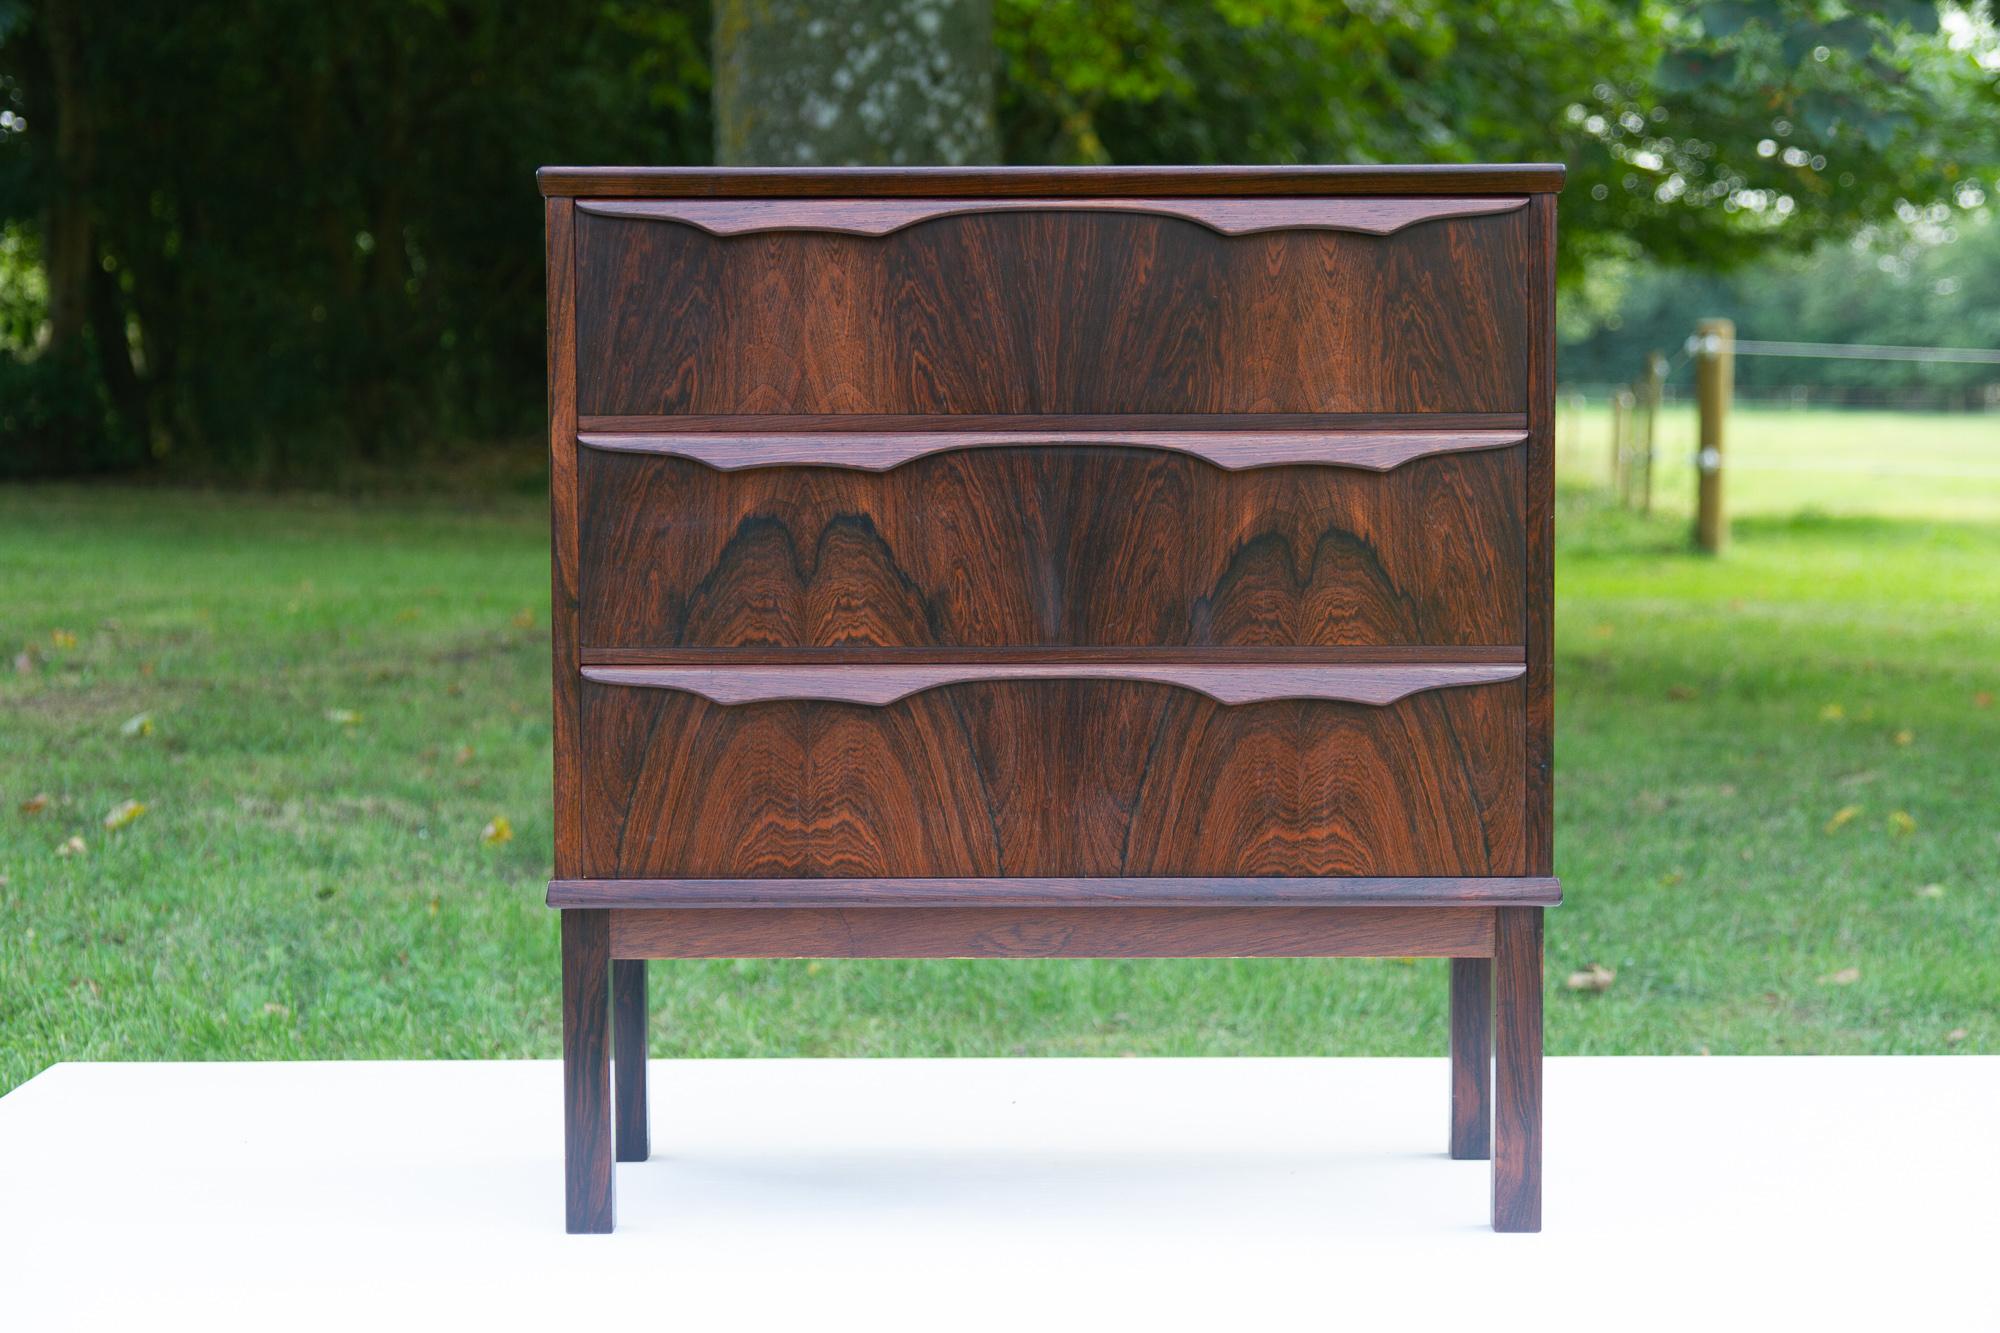 Vintage Danish Rosewood Dresser 1960s
Elegant Danish Mid-century Scandinavian Modern chest of drawers in Rosewood. Three wide drawers with dovetail joints and sculpted pulls in solid Rosewood. 
Beautiful and expressive Rosewood veneer with distinct